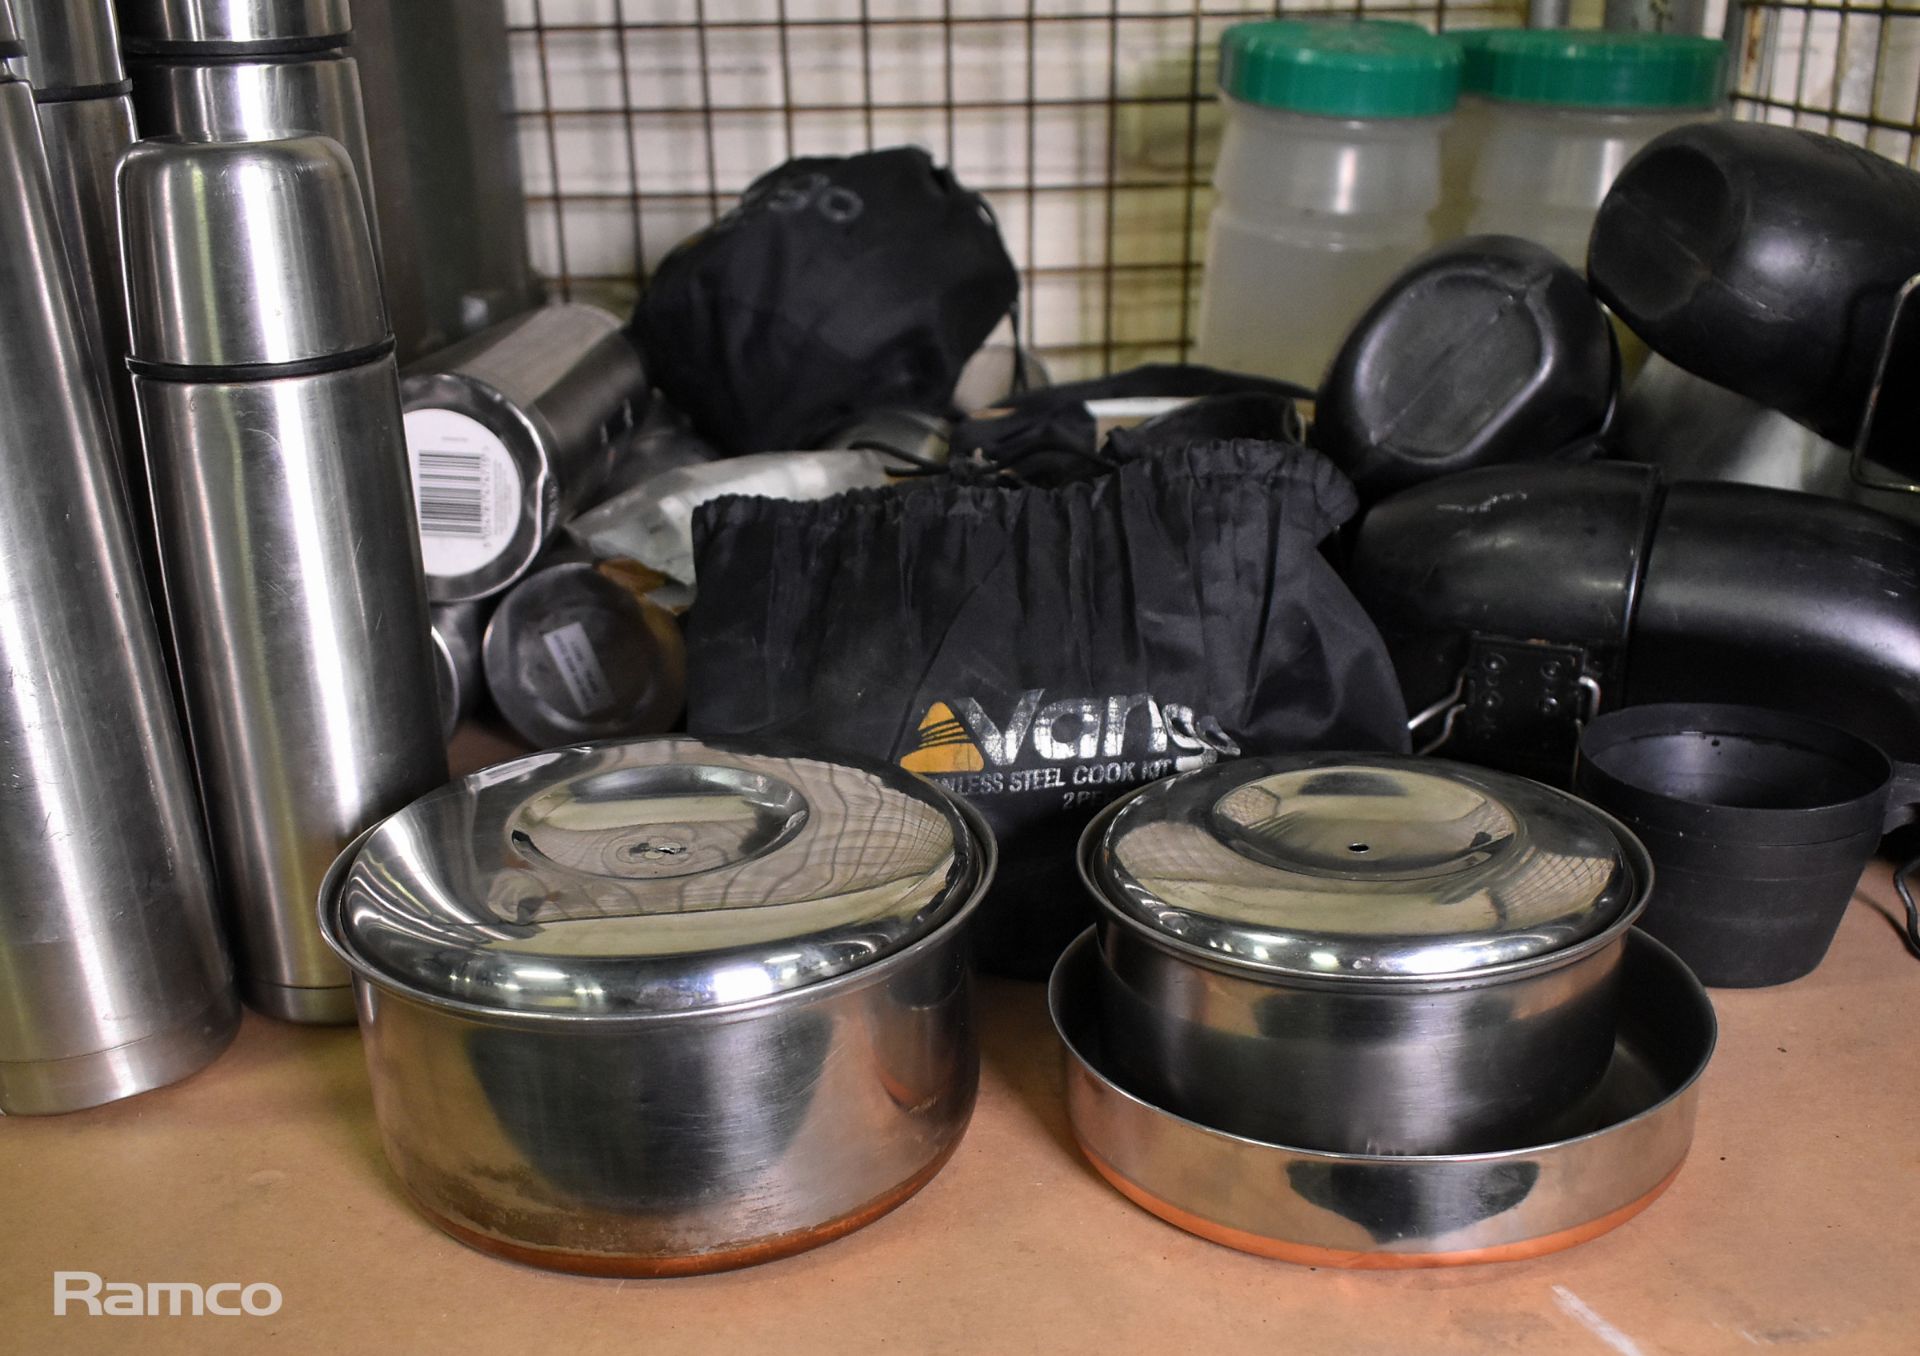 Camping accessories - Norwegian food containers, stainless steel flasks, cooking pots - Image 5 of 7